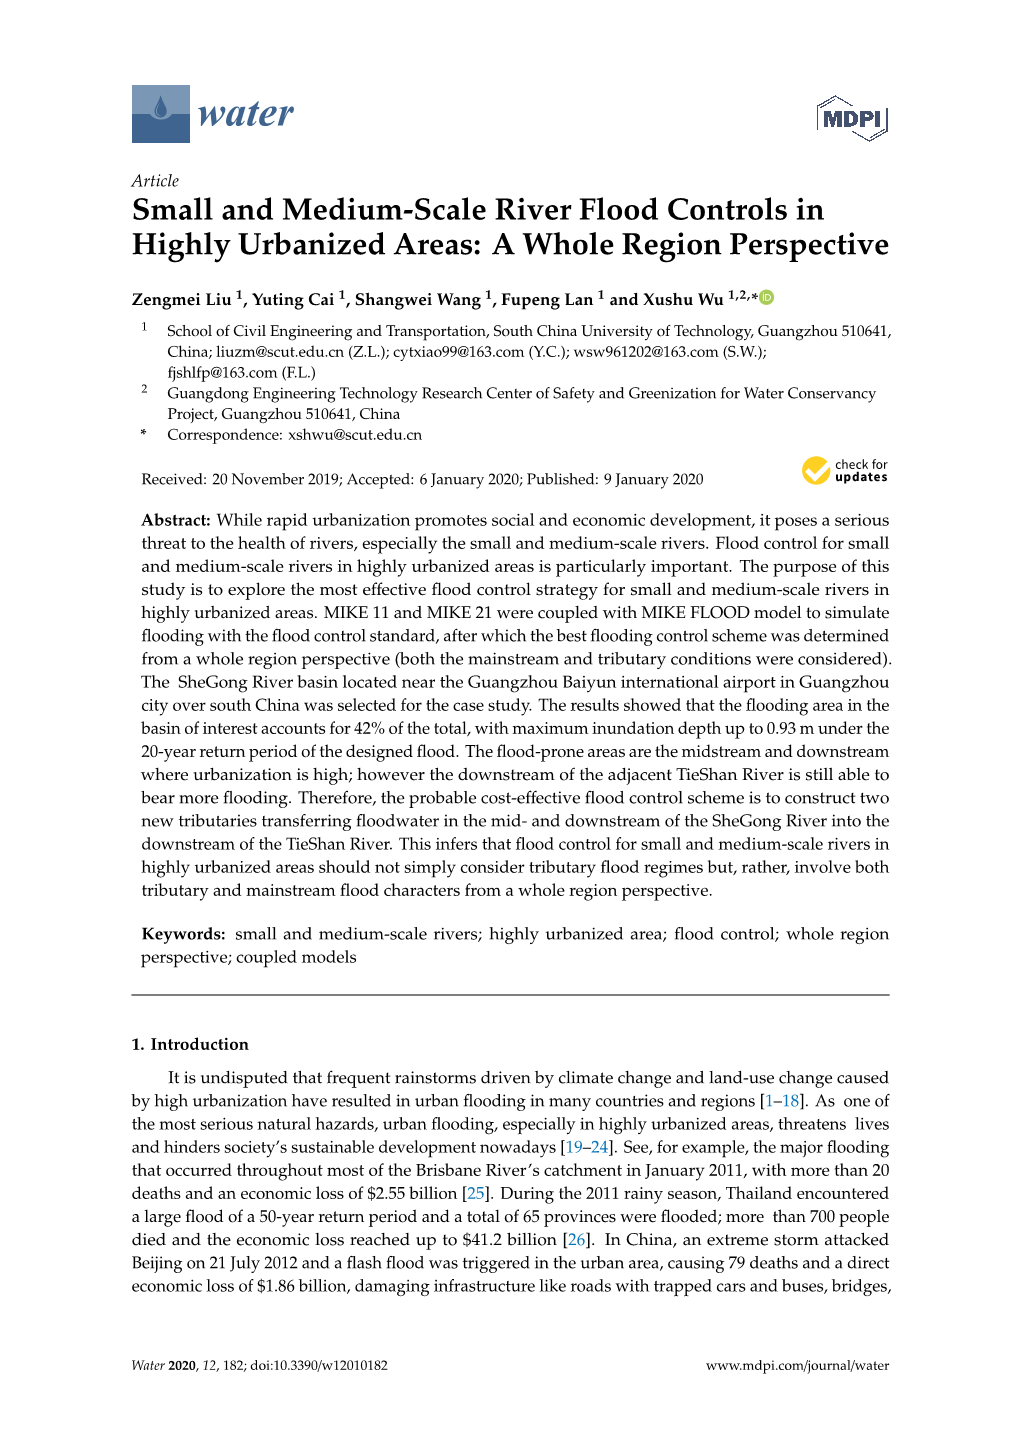 Small and Medium-Scale River Flood Controls in Highly Urbanized Areas: a Whole Region Perspective